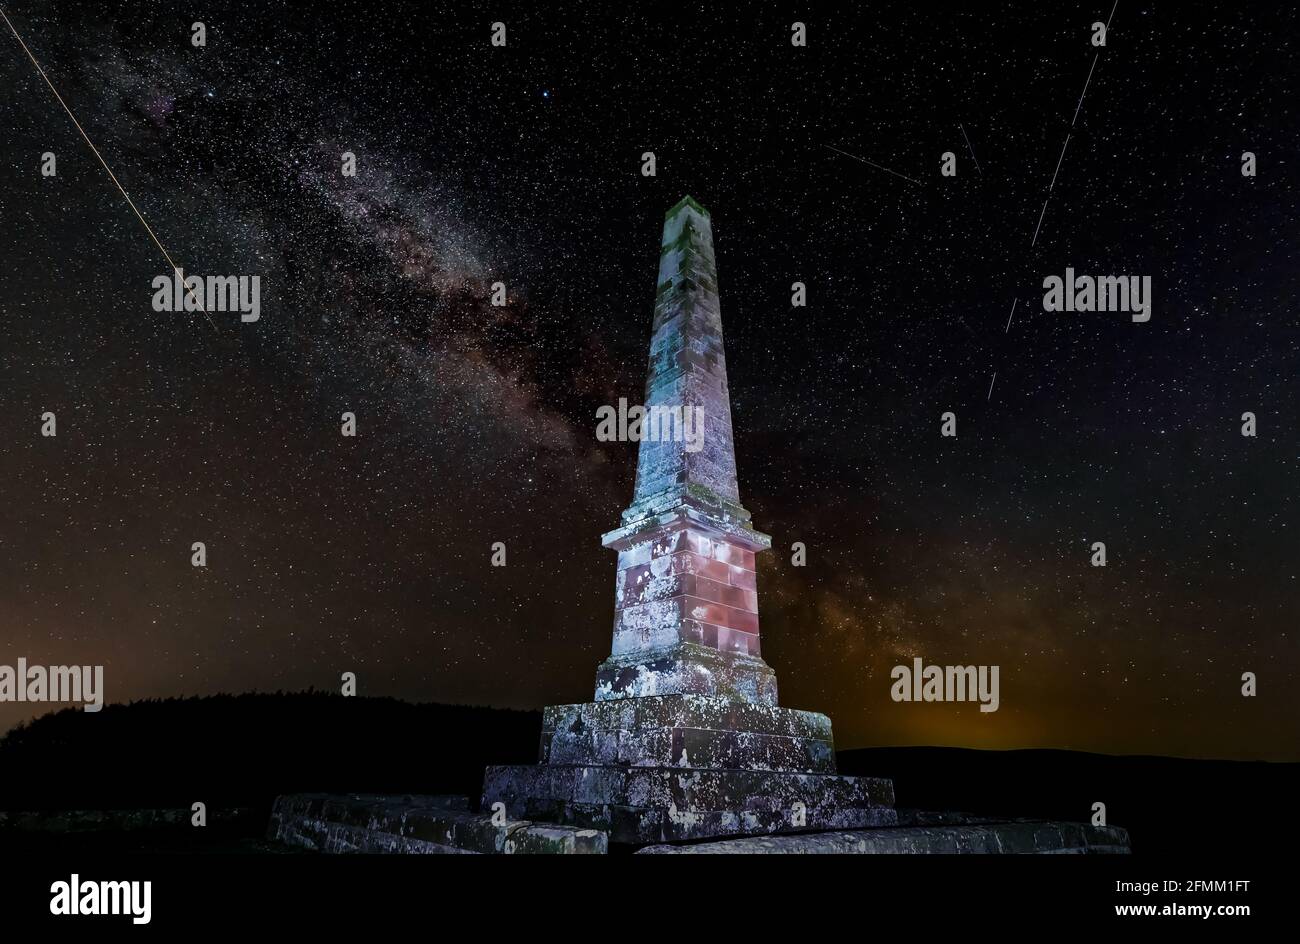 Balfour obelisk monument it up at night with Milky Way stars in sky and meteor, East Lothian, Scotland, UK Stock Photo